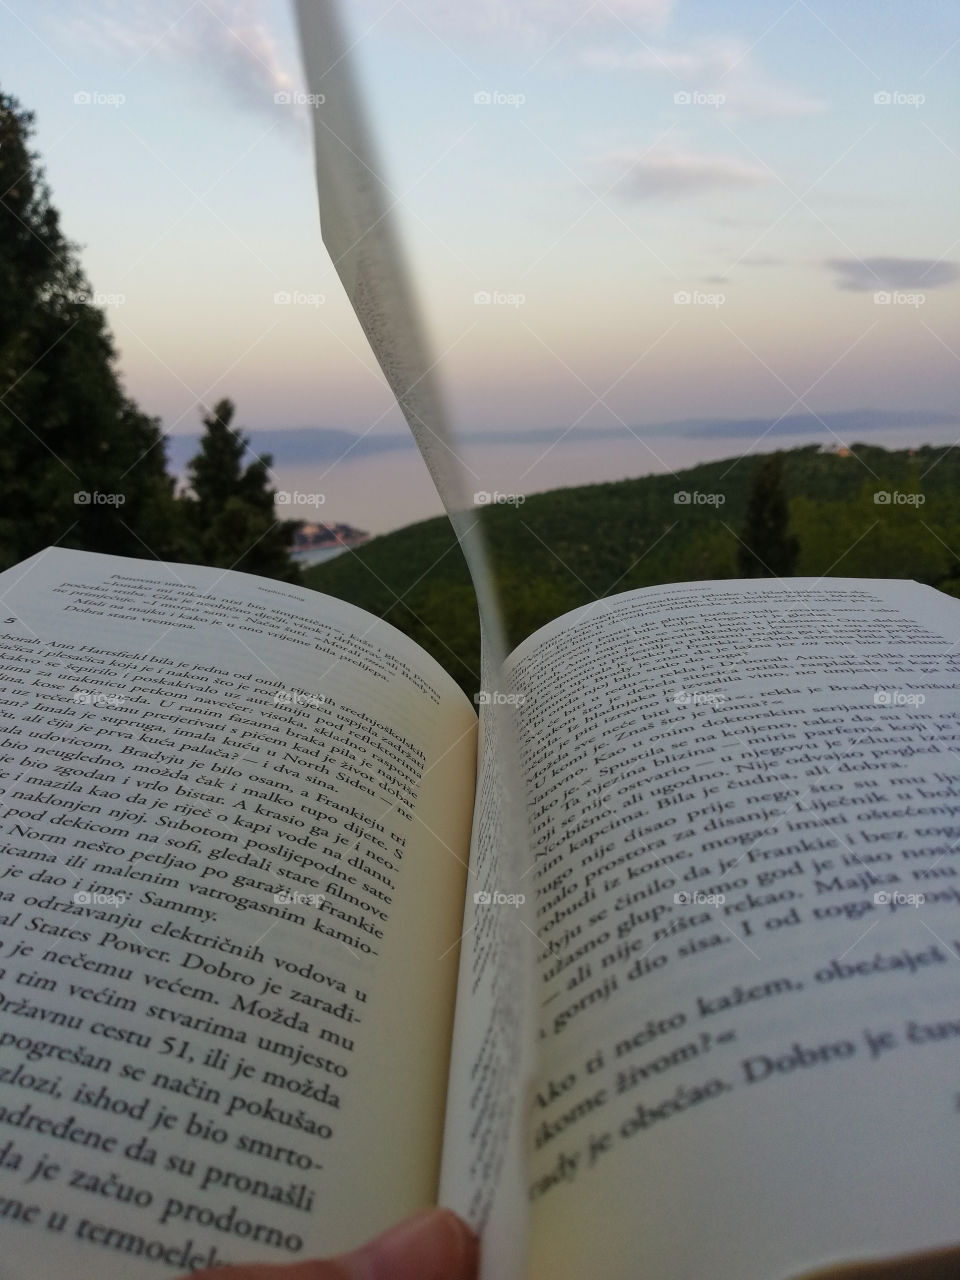 Relaxing while reading in this perfect place